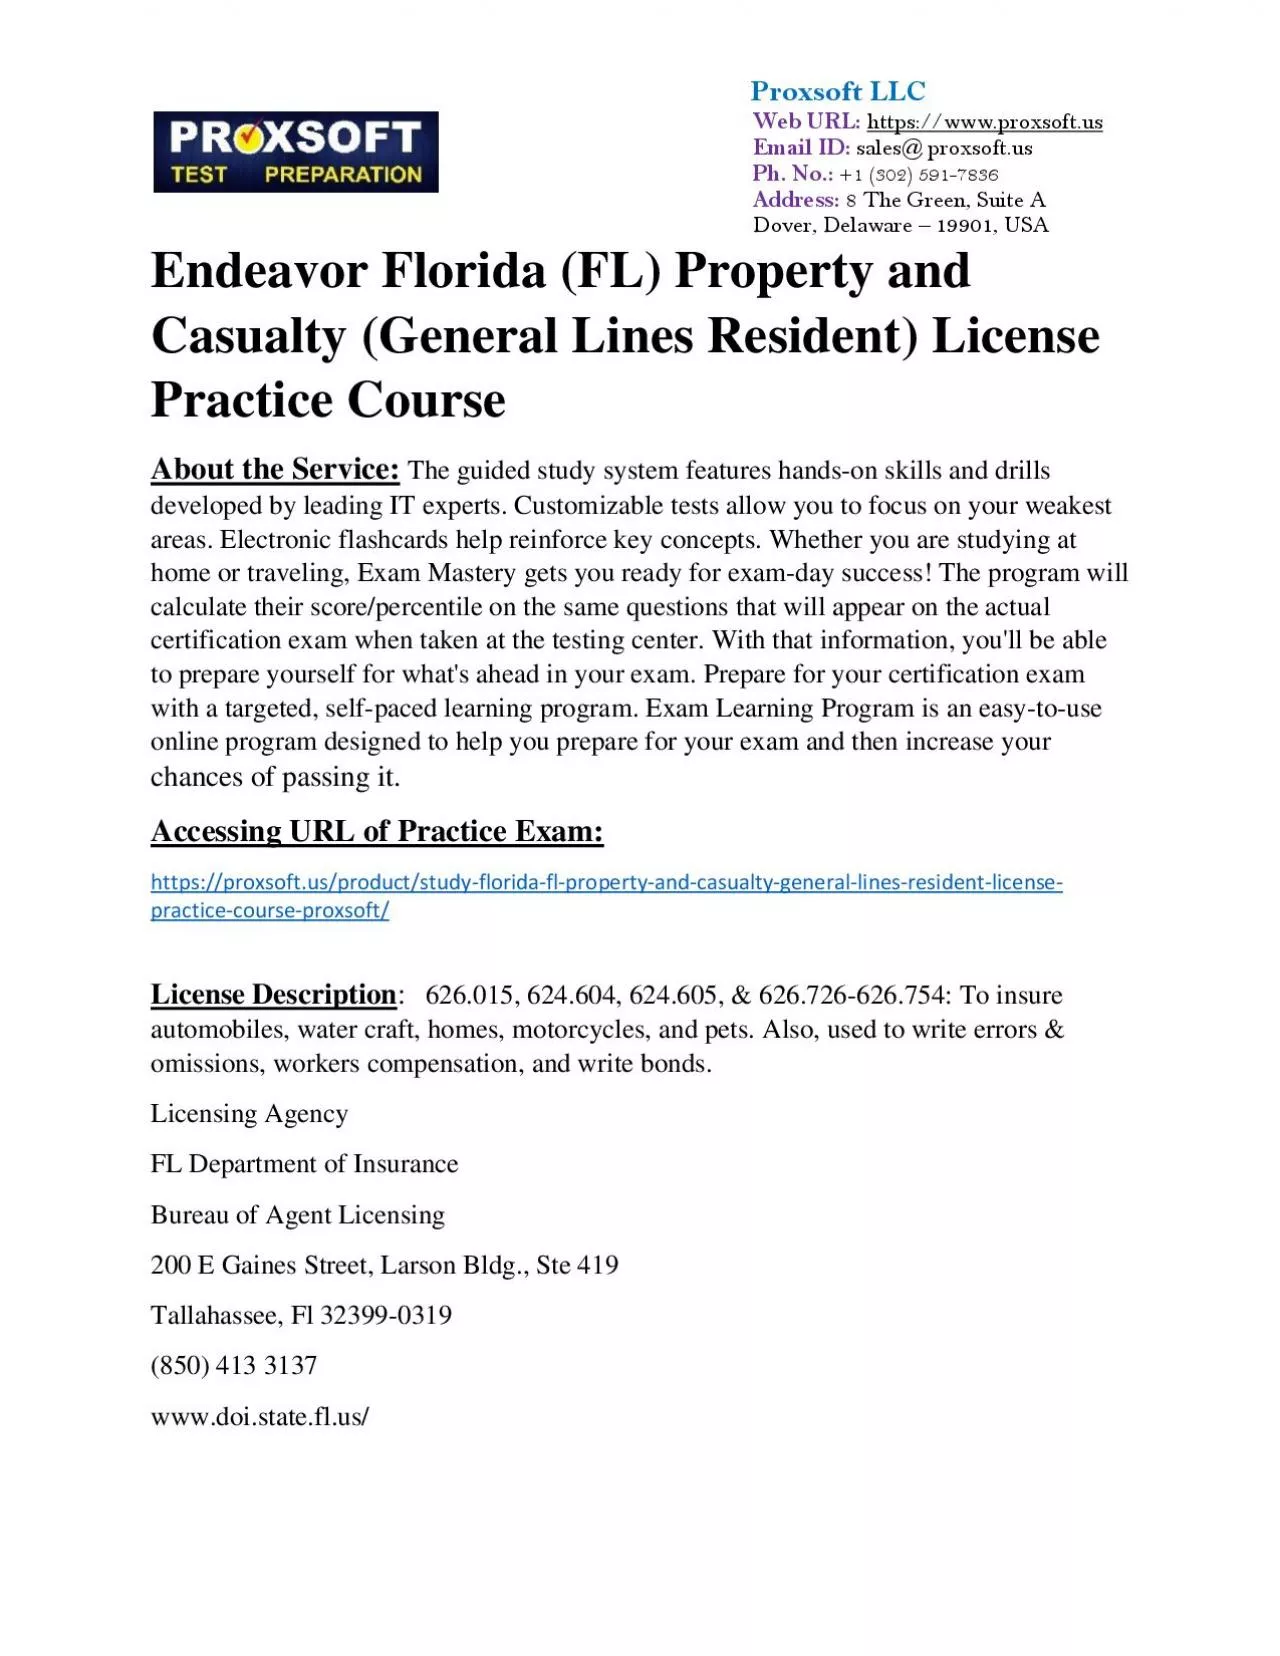 Endeavor Florida (FL) Property and Casualty (General Lines Resident) License Practice